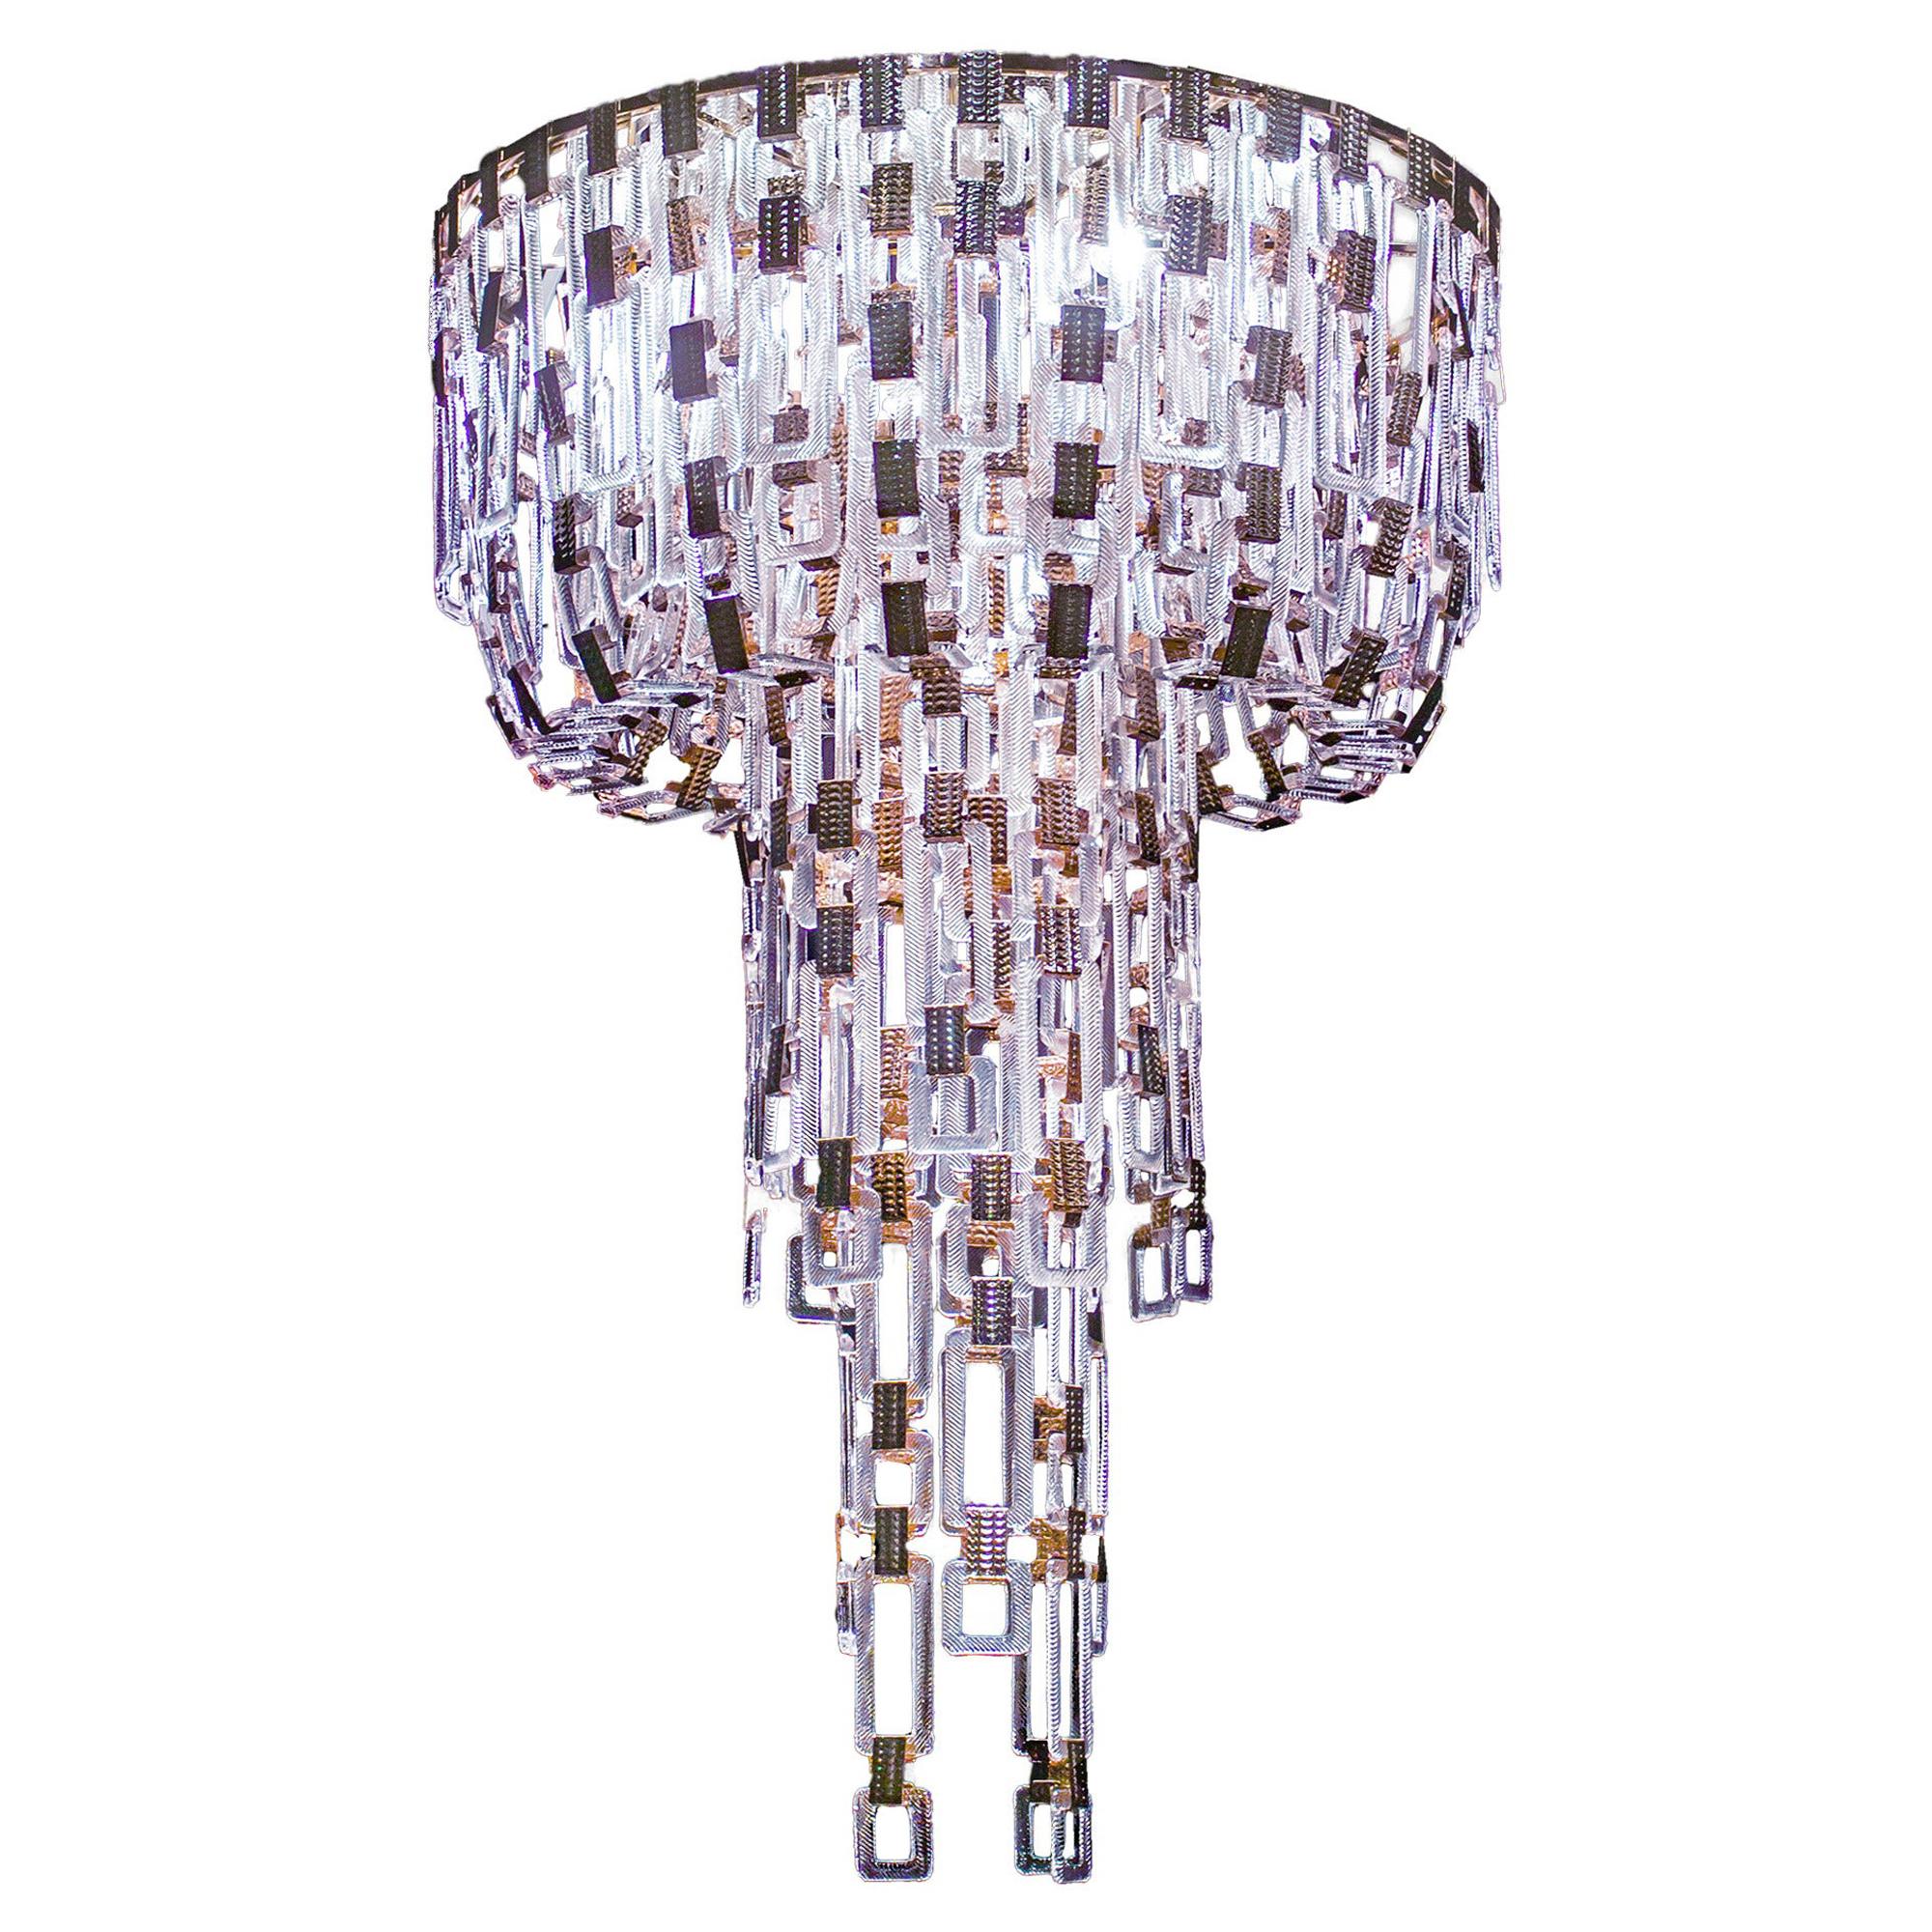 Artistic Handmade Chandelier, Belle Epoque R/130  by A. Lohman and La Murrina For Sale